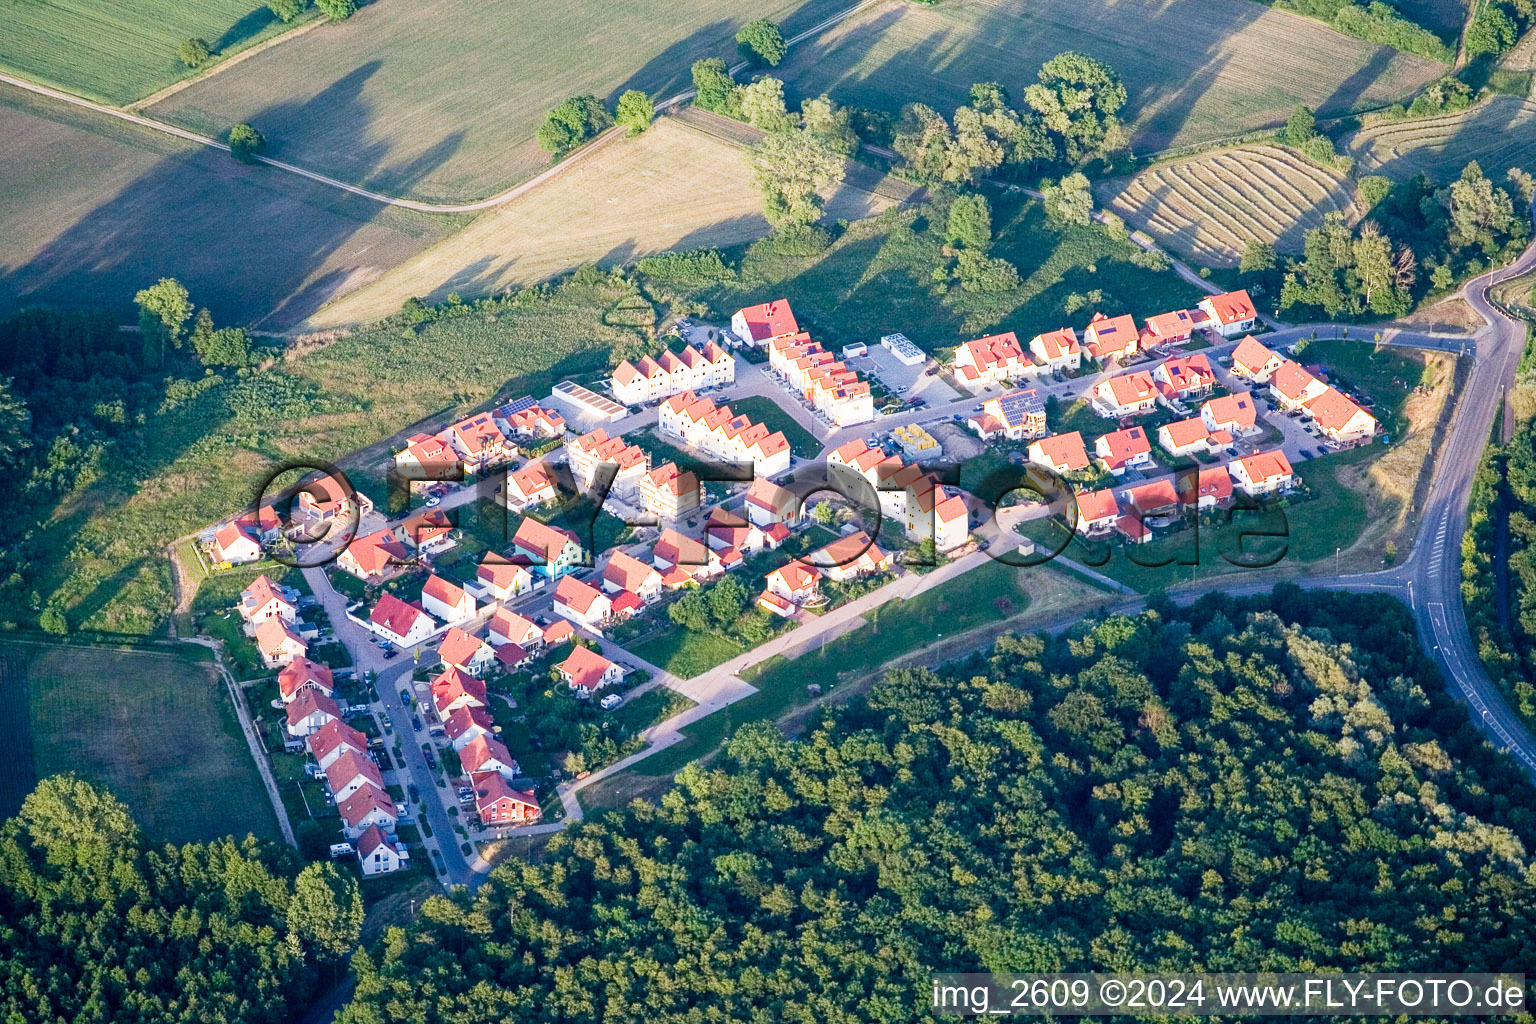 Aerial view of New development area in Wörth am Rhein in the state Rhineland-Palatinate, Germany